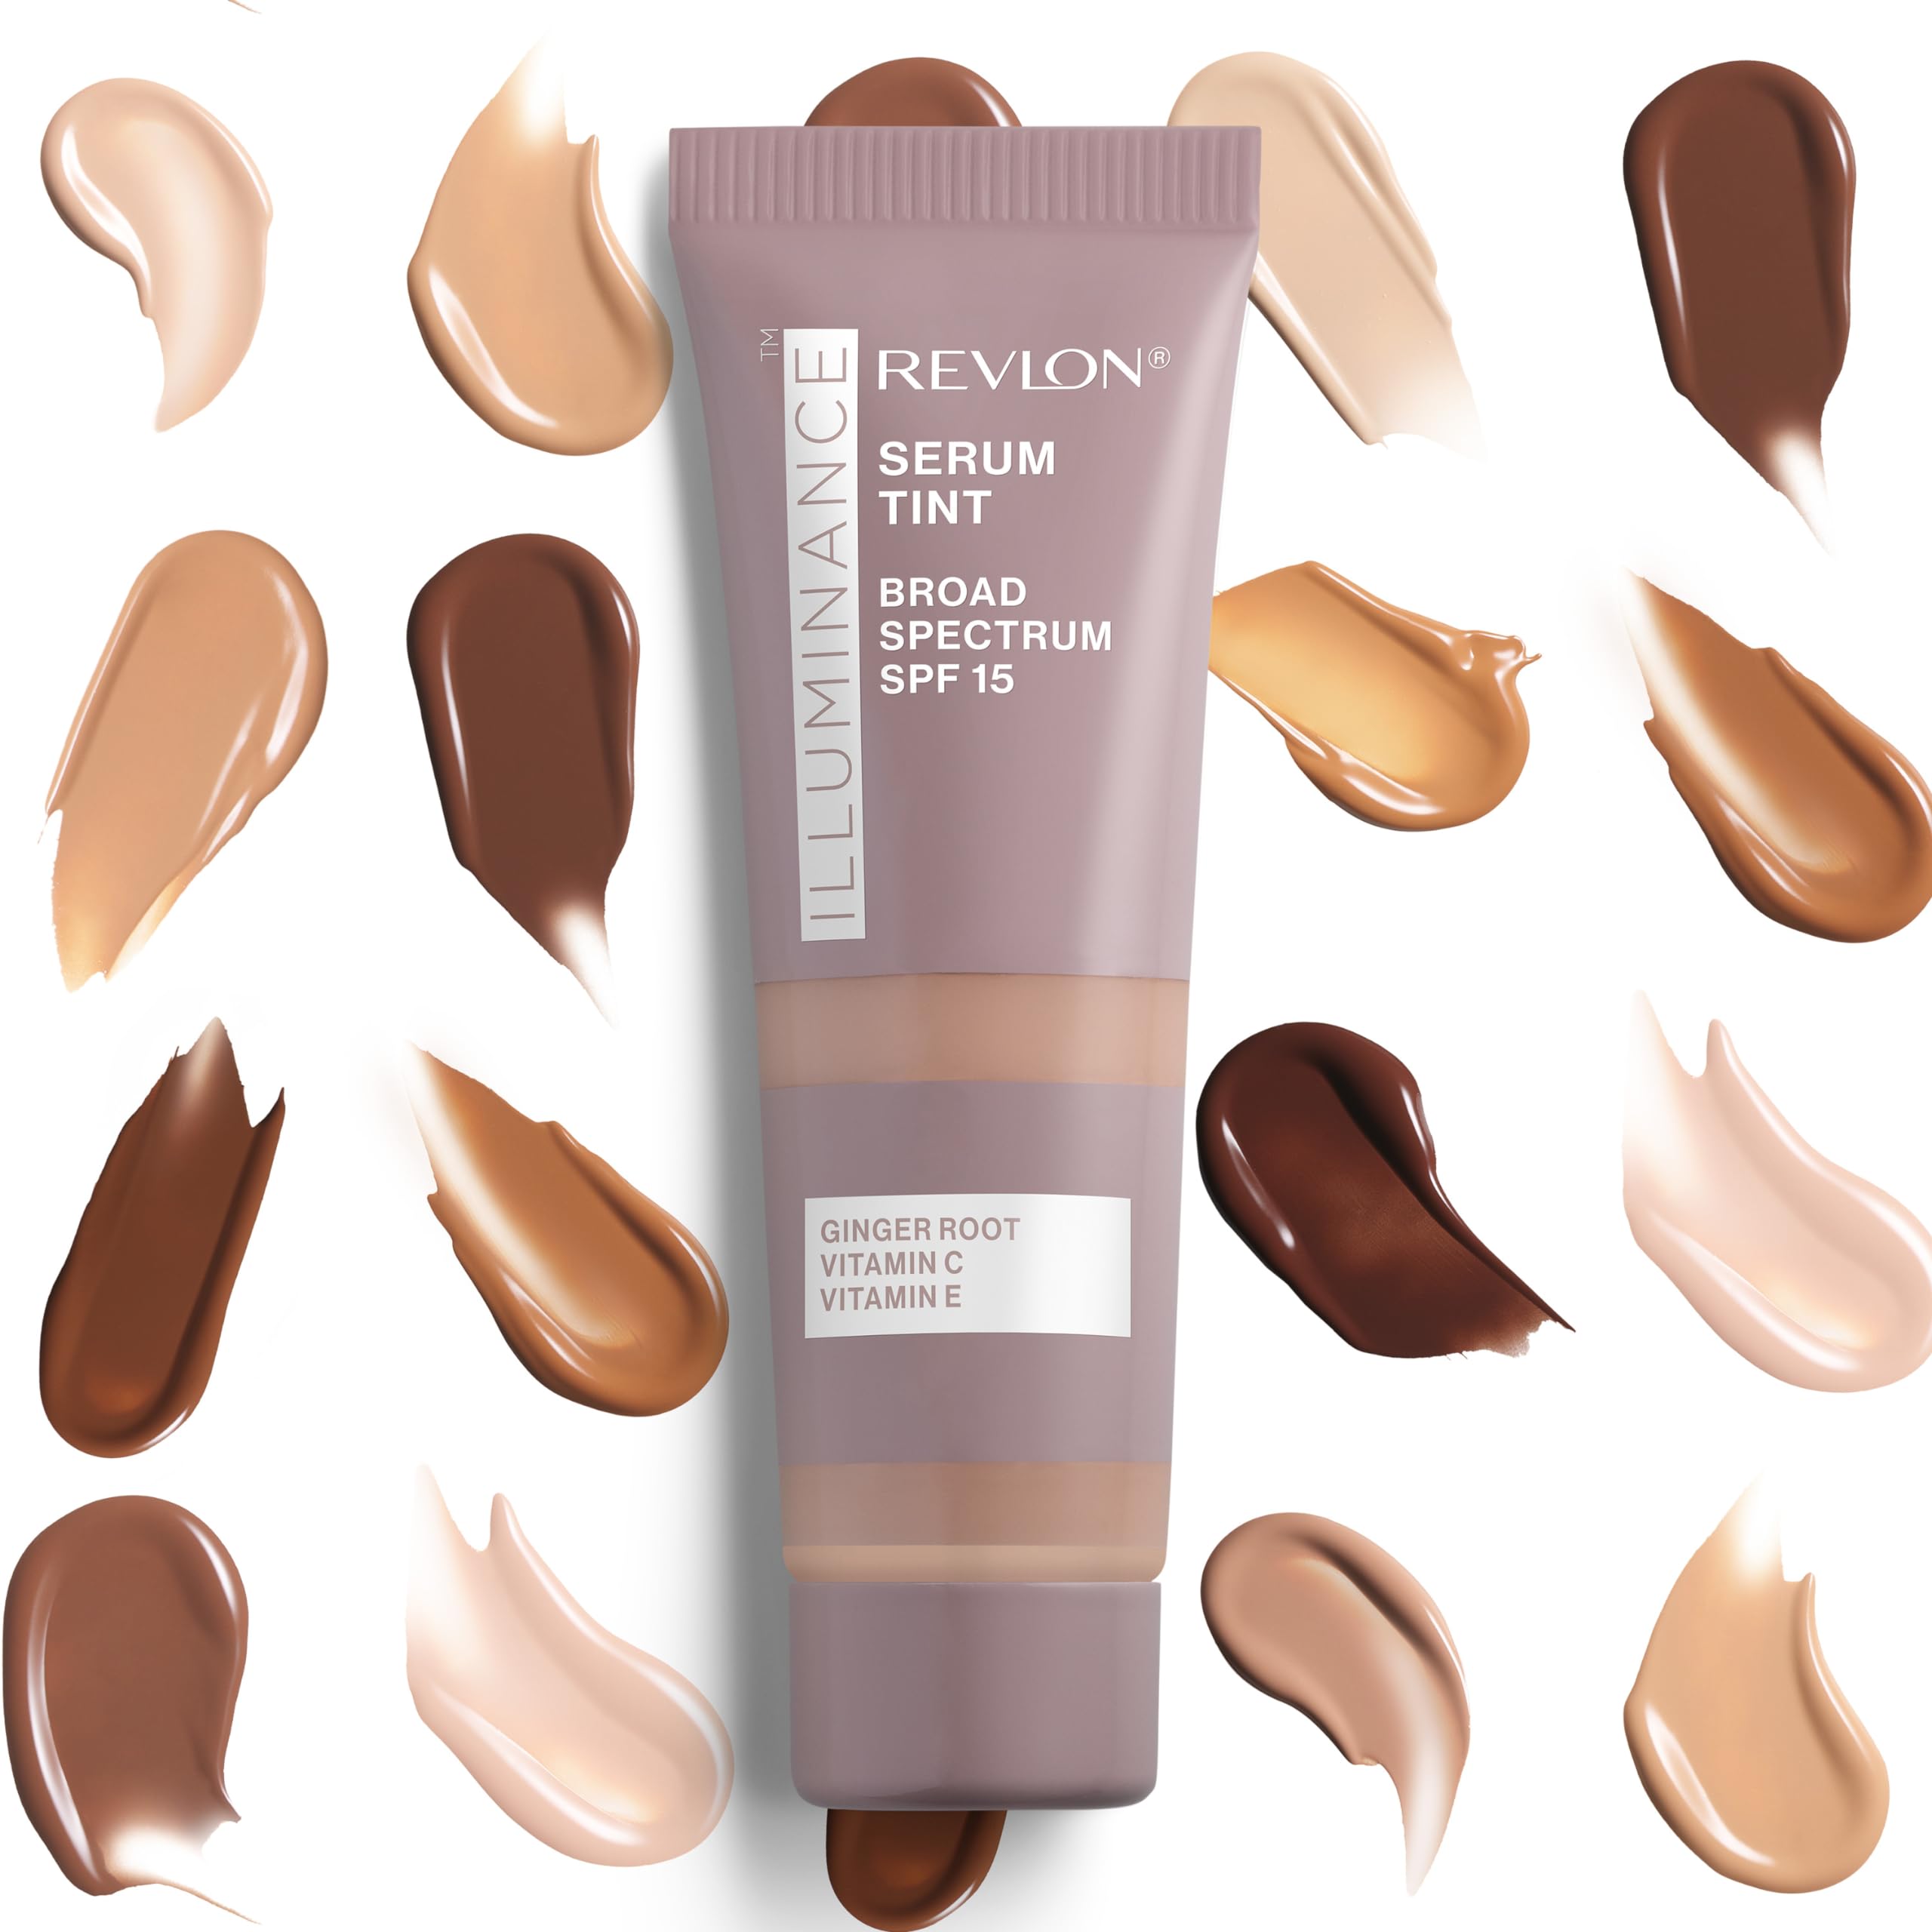 Revlon Illuminance Tinted Serum, Triple Hyaluronic Acid, Evens Out Skin Tone Over Time and Hydrates All Day, SPF 15, 213 Light Natural, 0.94 fl oz.